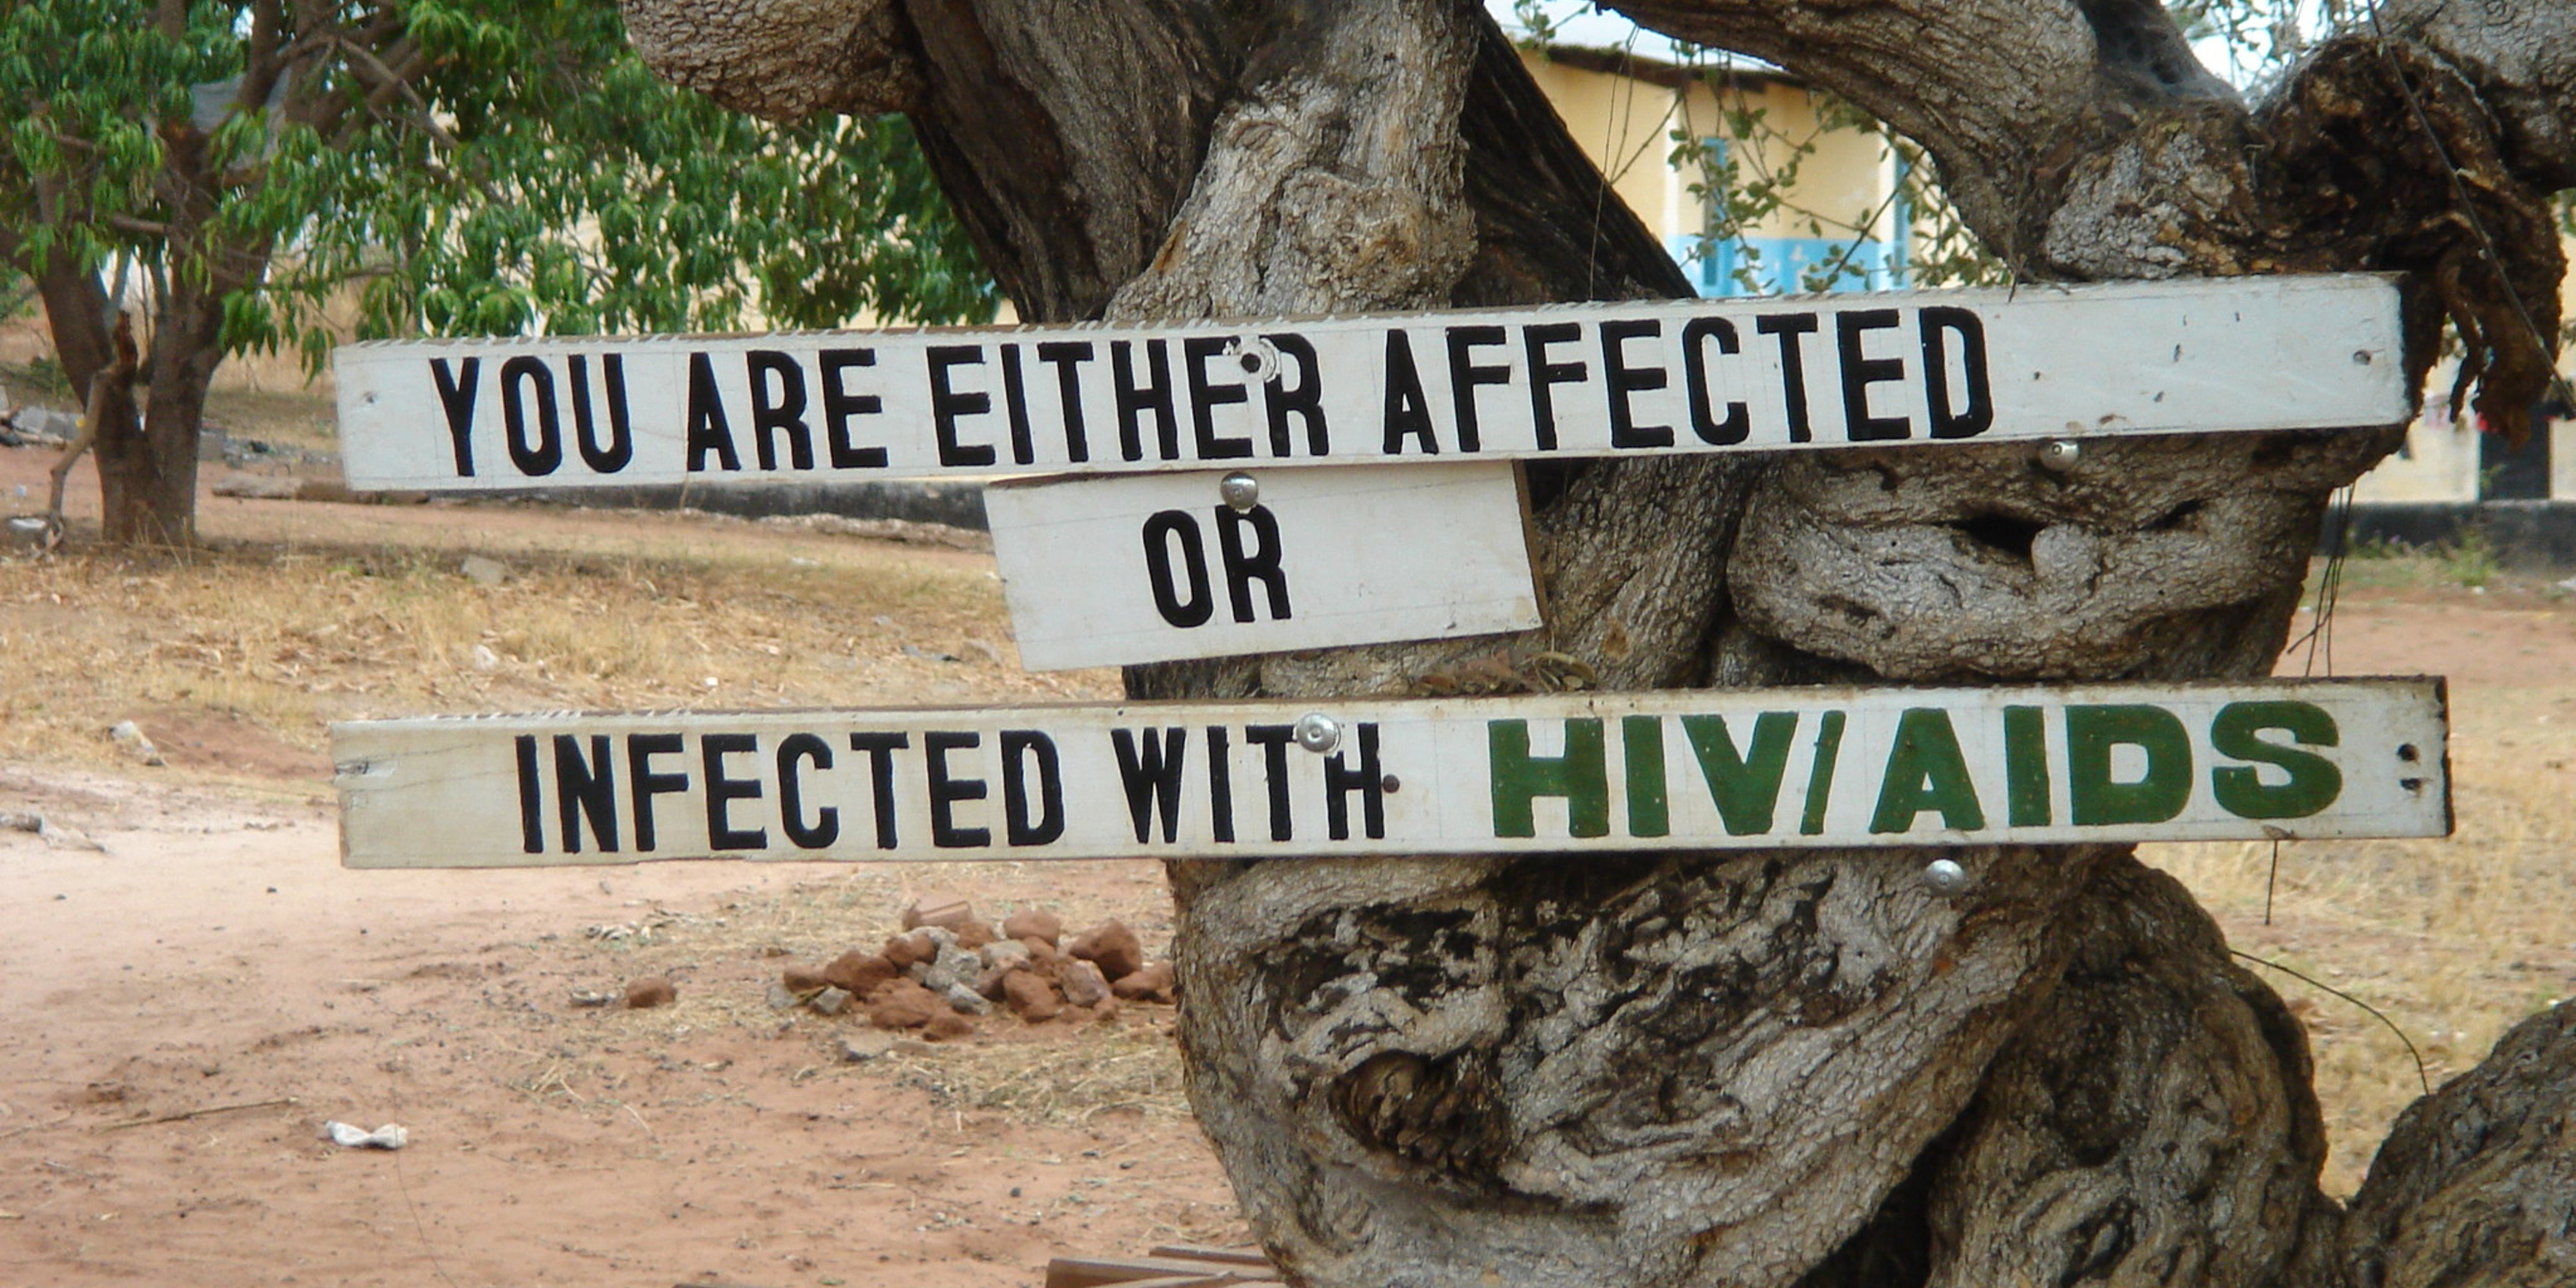 sign reading You are either affected or infected with HIV/AIDS in Zambia